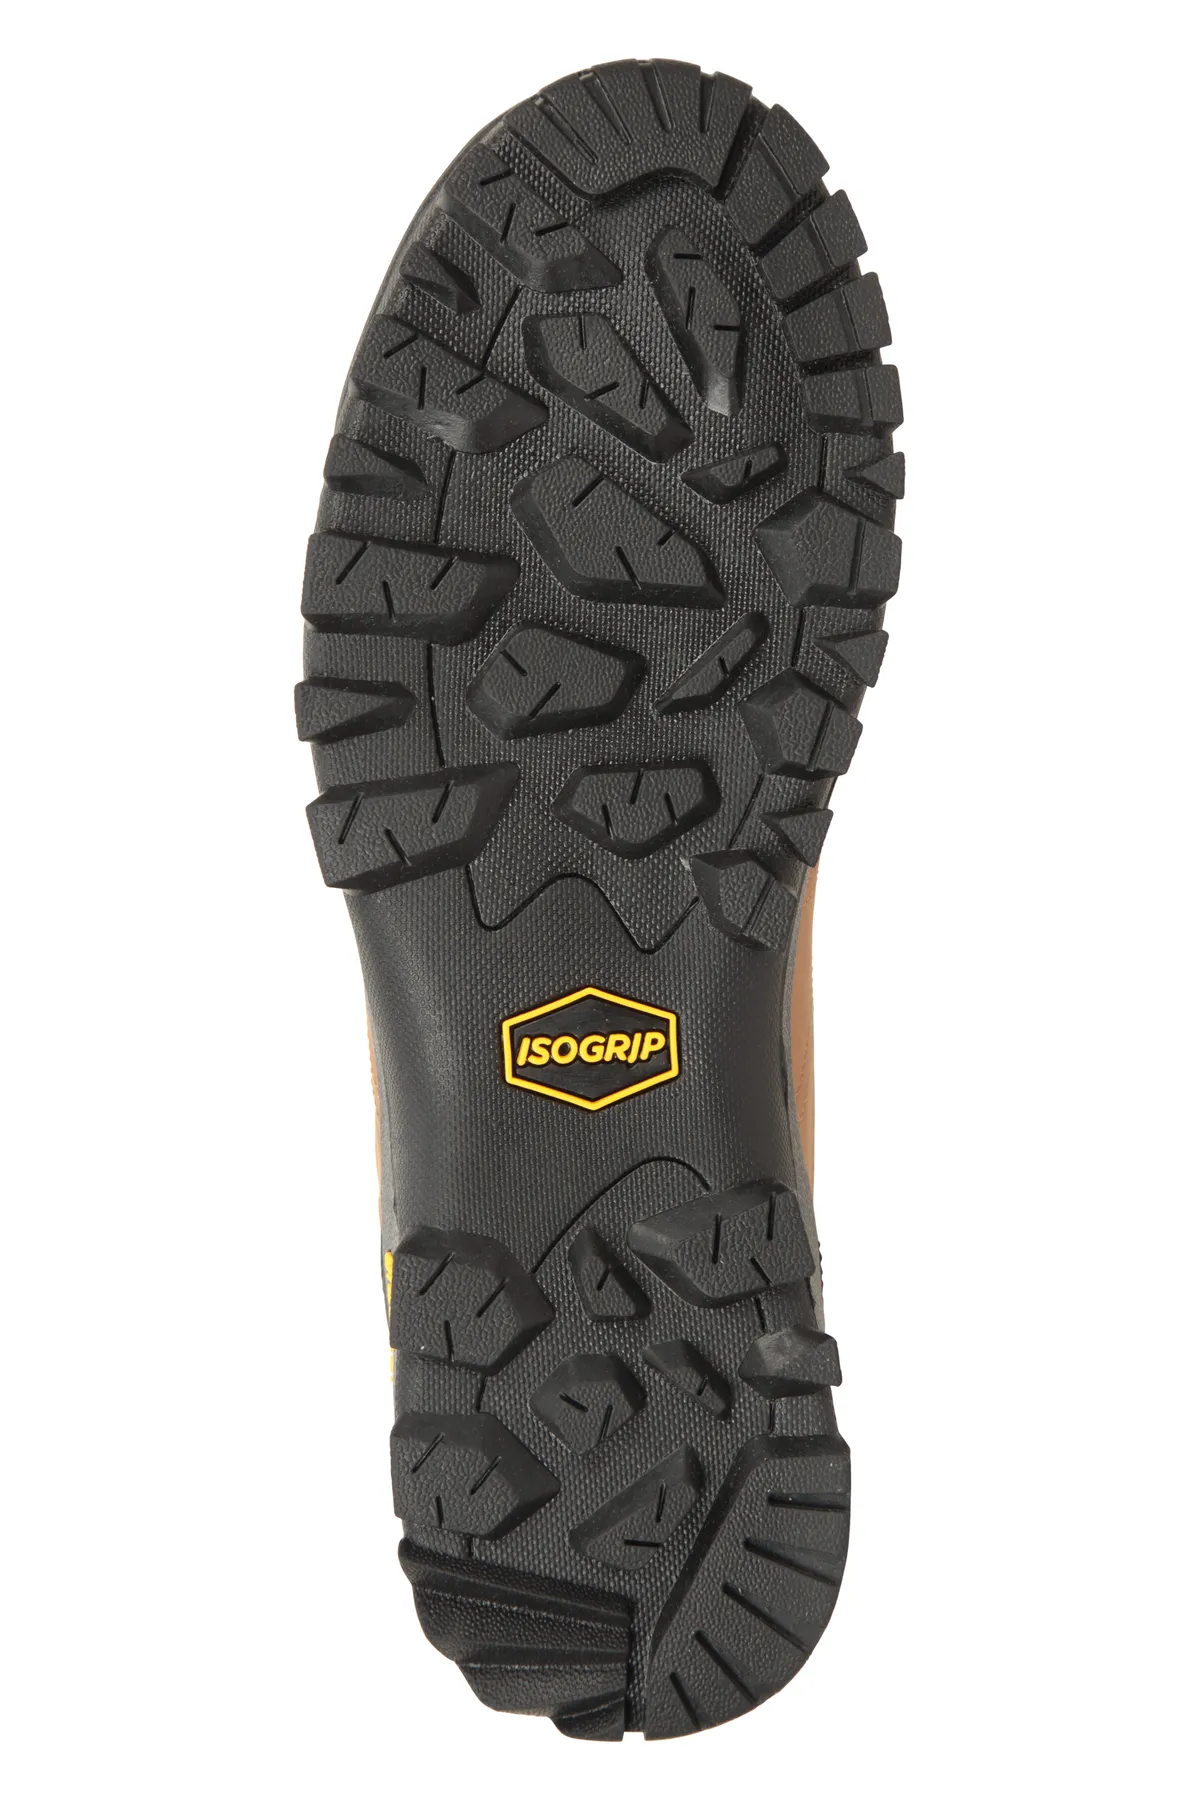 Hurricane Extreme Mens IsoGrip Boots review